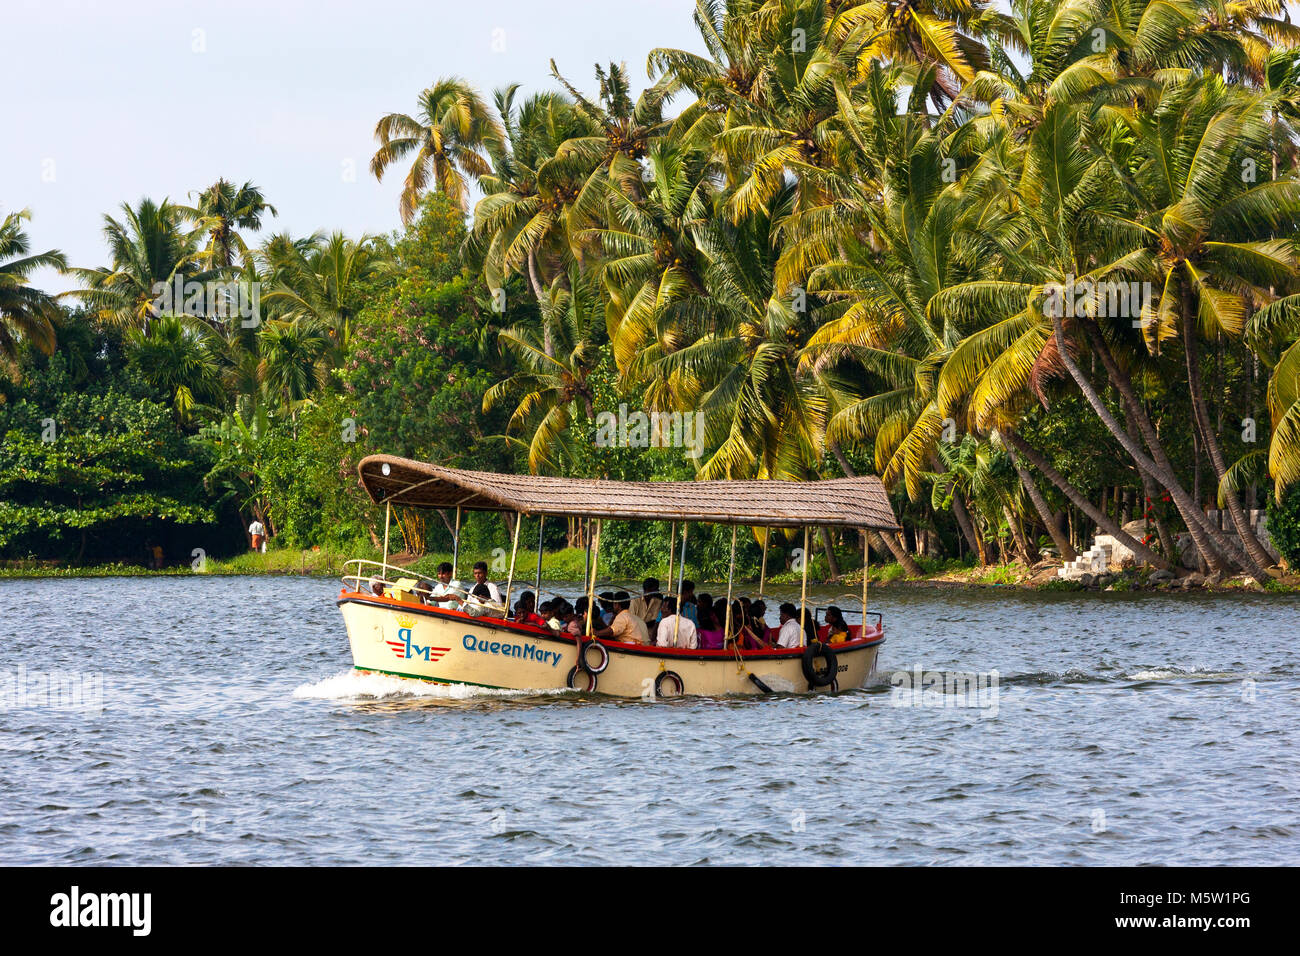 Passengers on a small boat crossing one of the many canals on the backwaters near Alleppy and Kumarakom in Kerala, India. Stock Photo